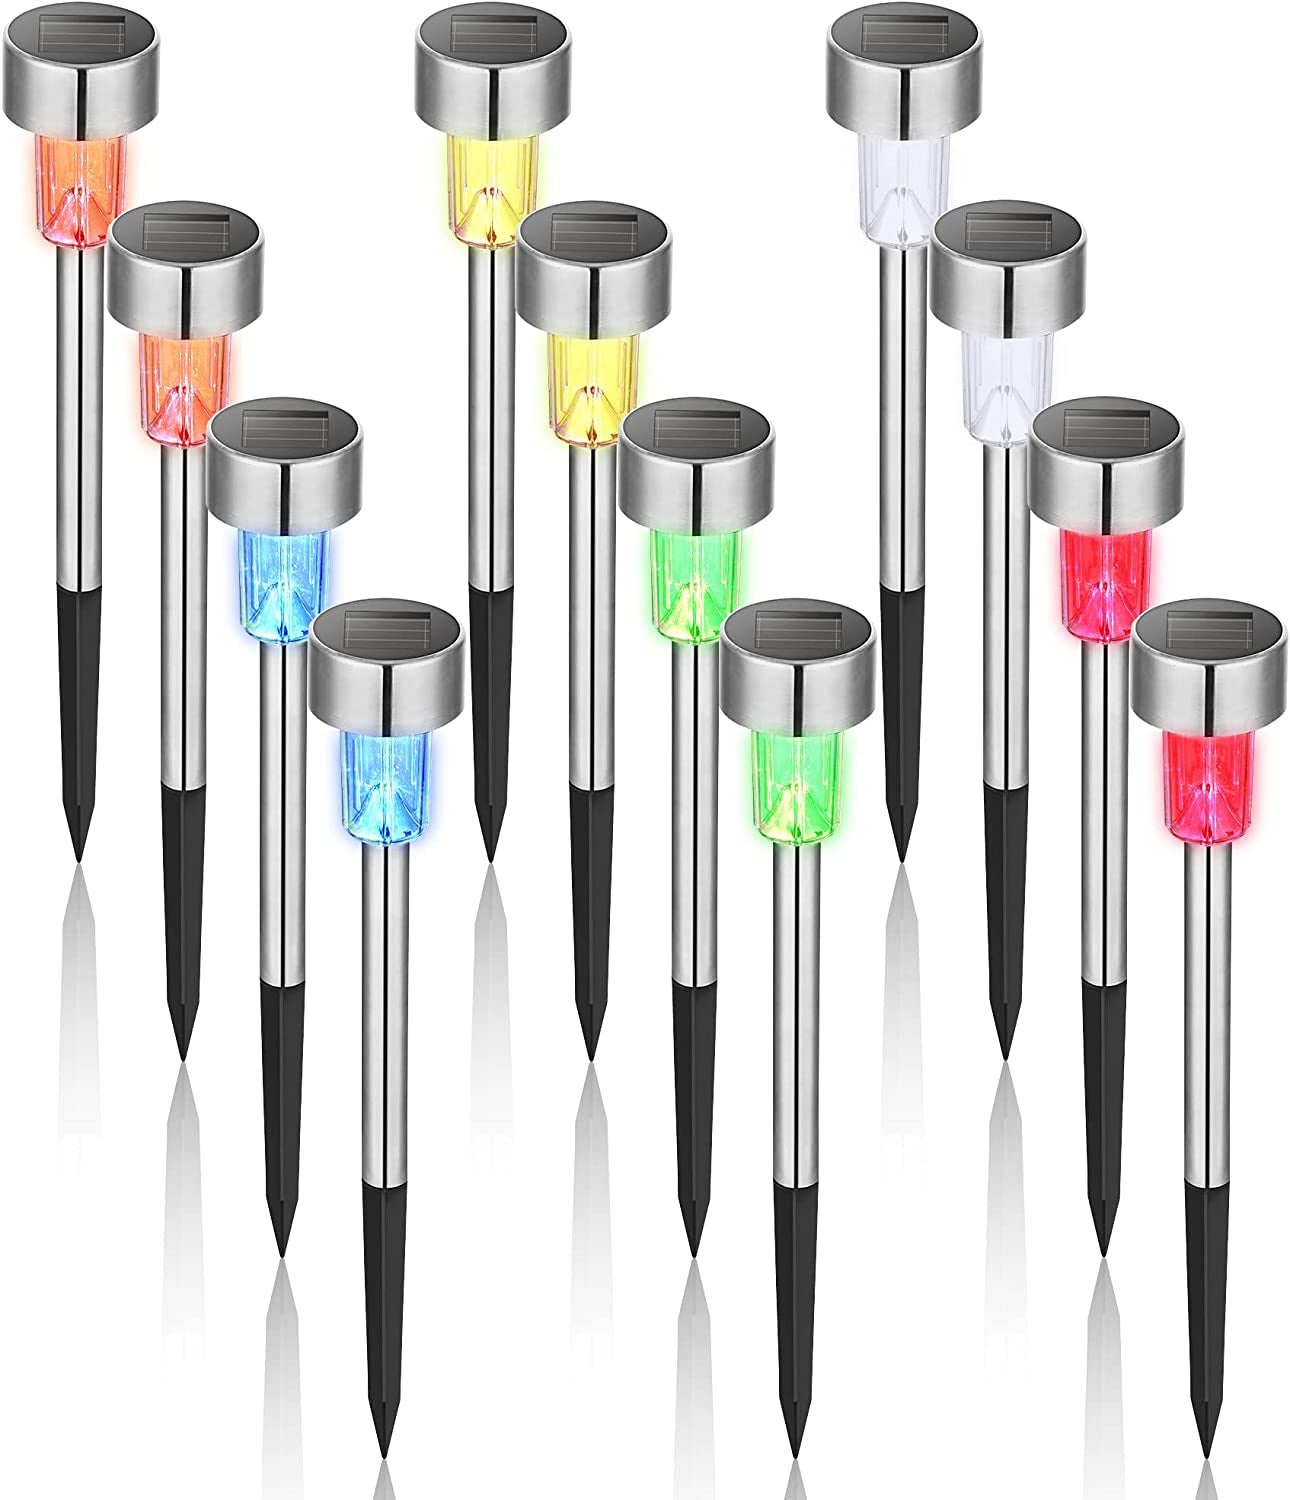 12Pack Stainless Steel LED Solar Lights - Everyday-Sales.com